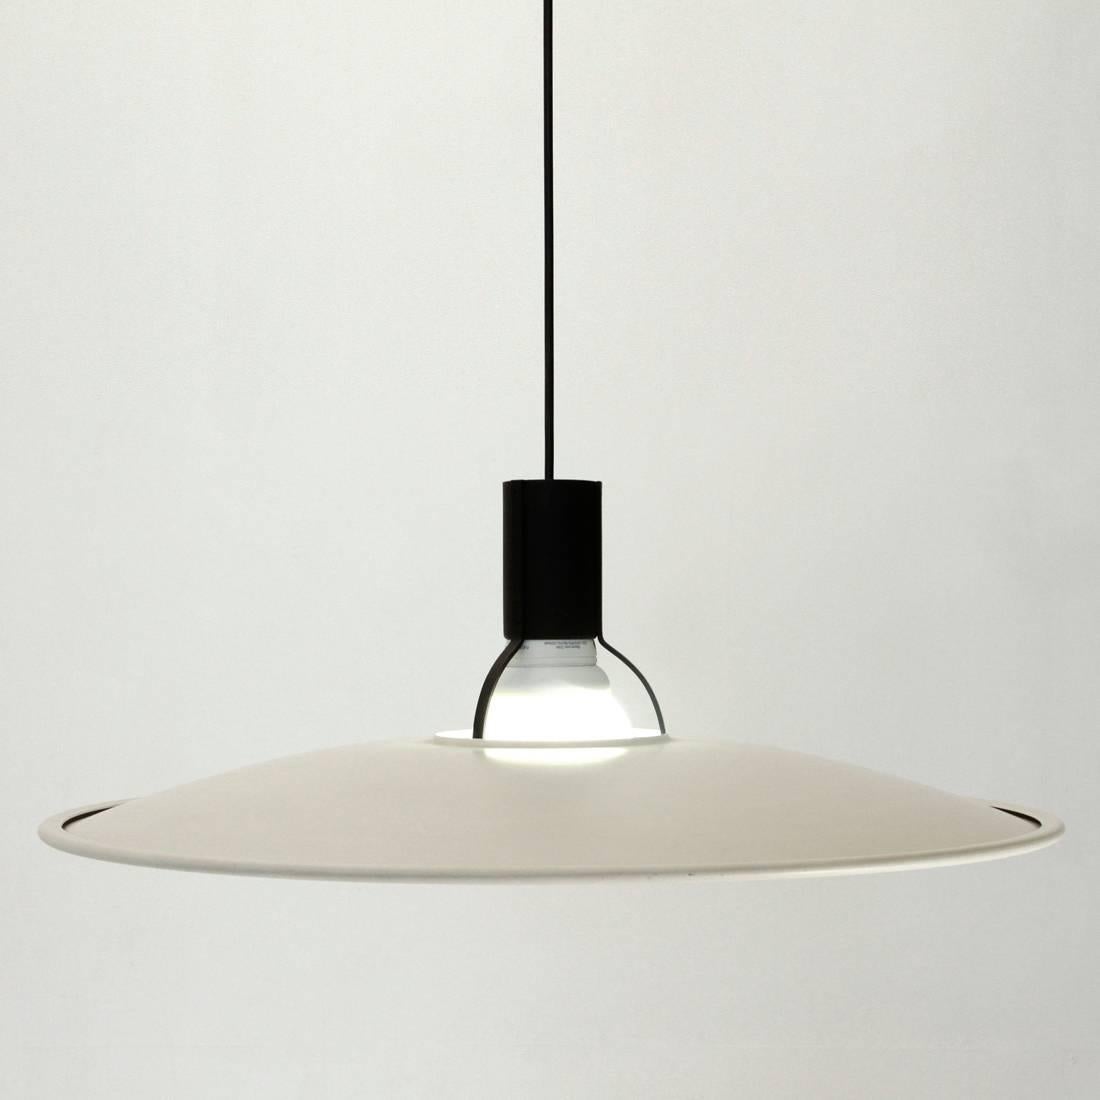 Ceiling lamp designed in 1973 by Gino Sarfatti for Arteluce.
Black metal frame, Circular white lacquered metal diffuser.
Some signs on the diffuser where the lamp holder is supported.
Dimensions: Diameter 62 cm, height 76 cm.